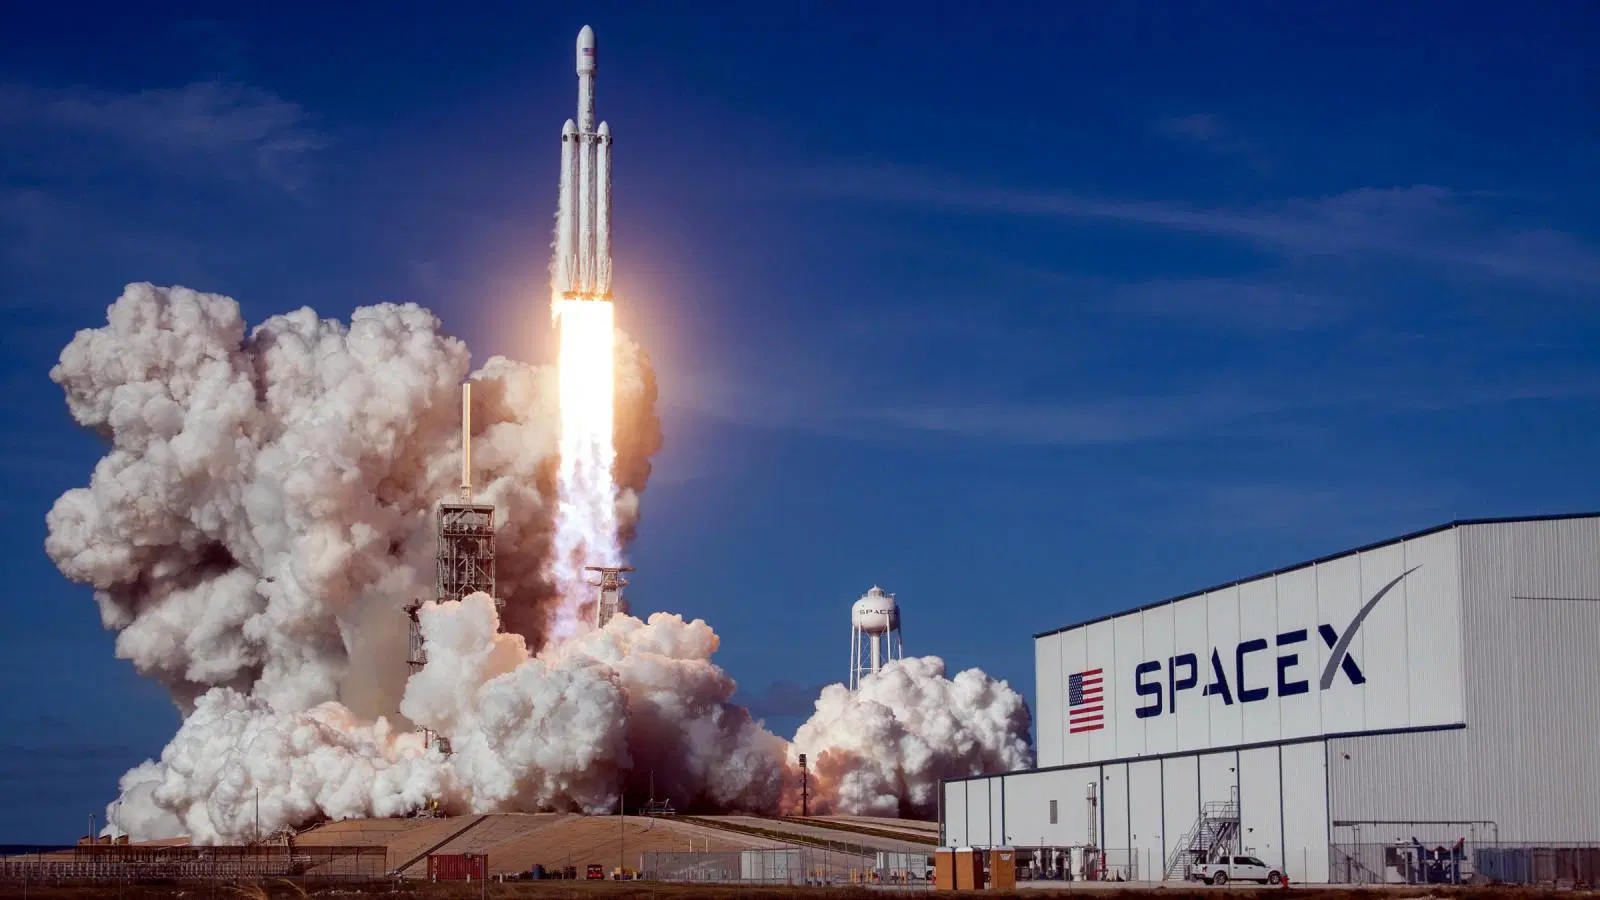 SpaceX wins contract for NASA’s $332M mission to lunar outpost